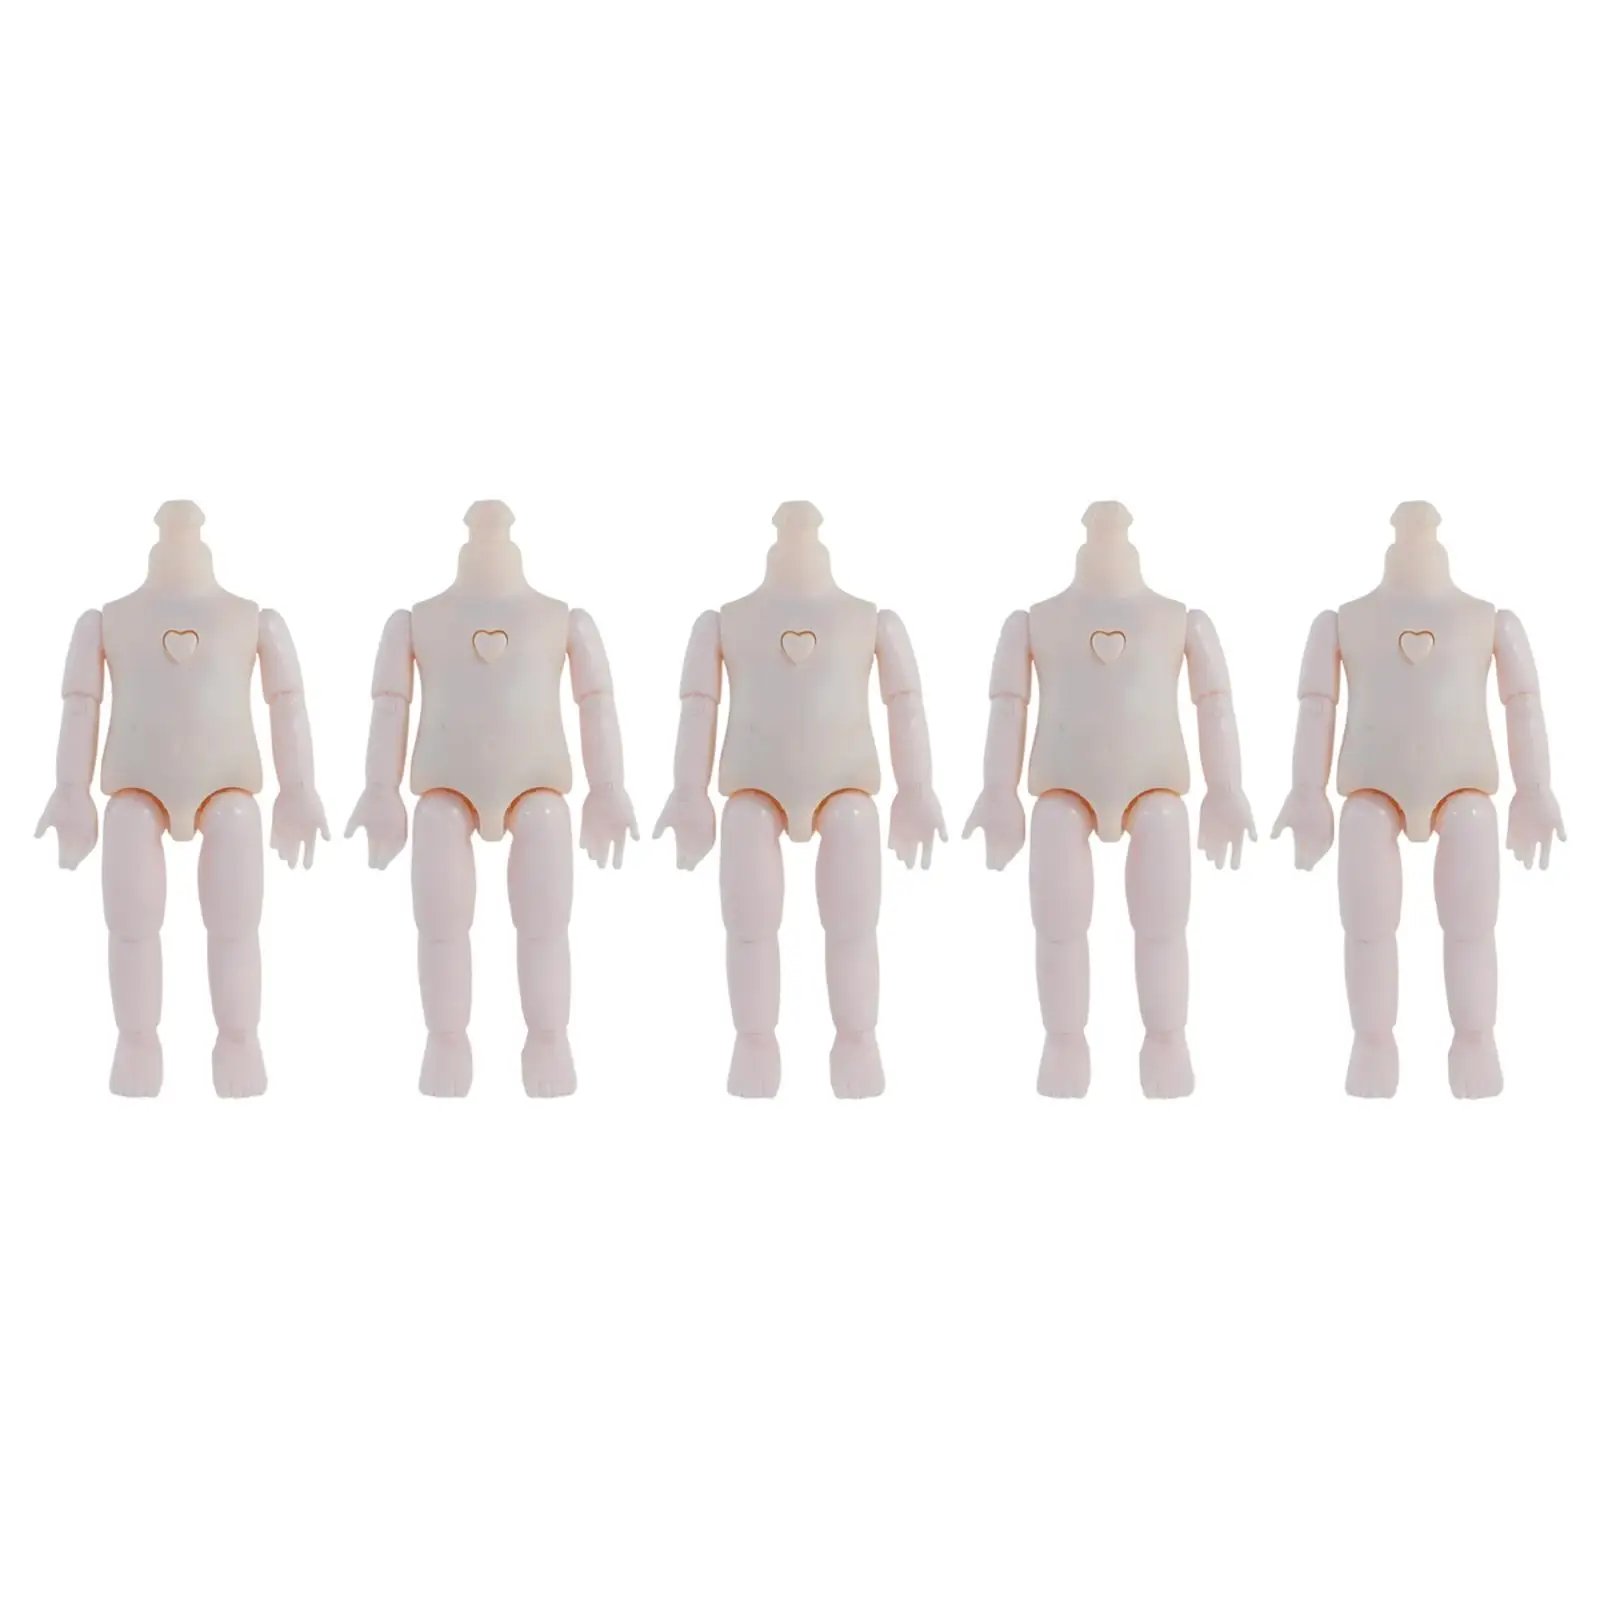 5 Pieces Doll Nude Body Height 16cm Moveable Jointed Dolls Action Figure with Spare hands Making Accessories No Head Gifts